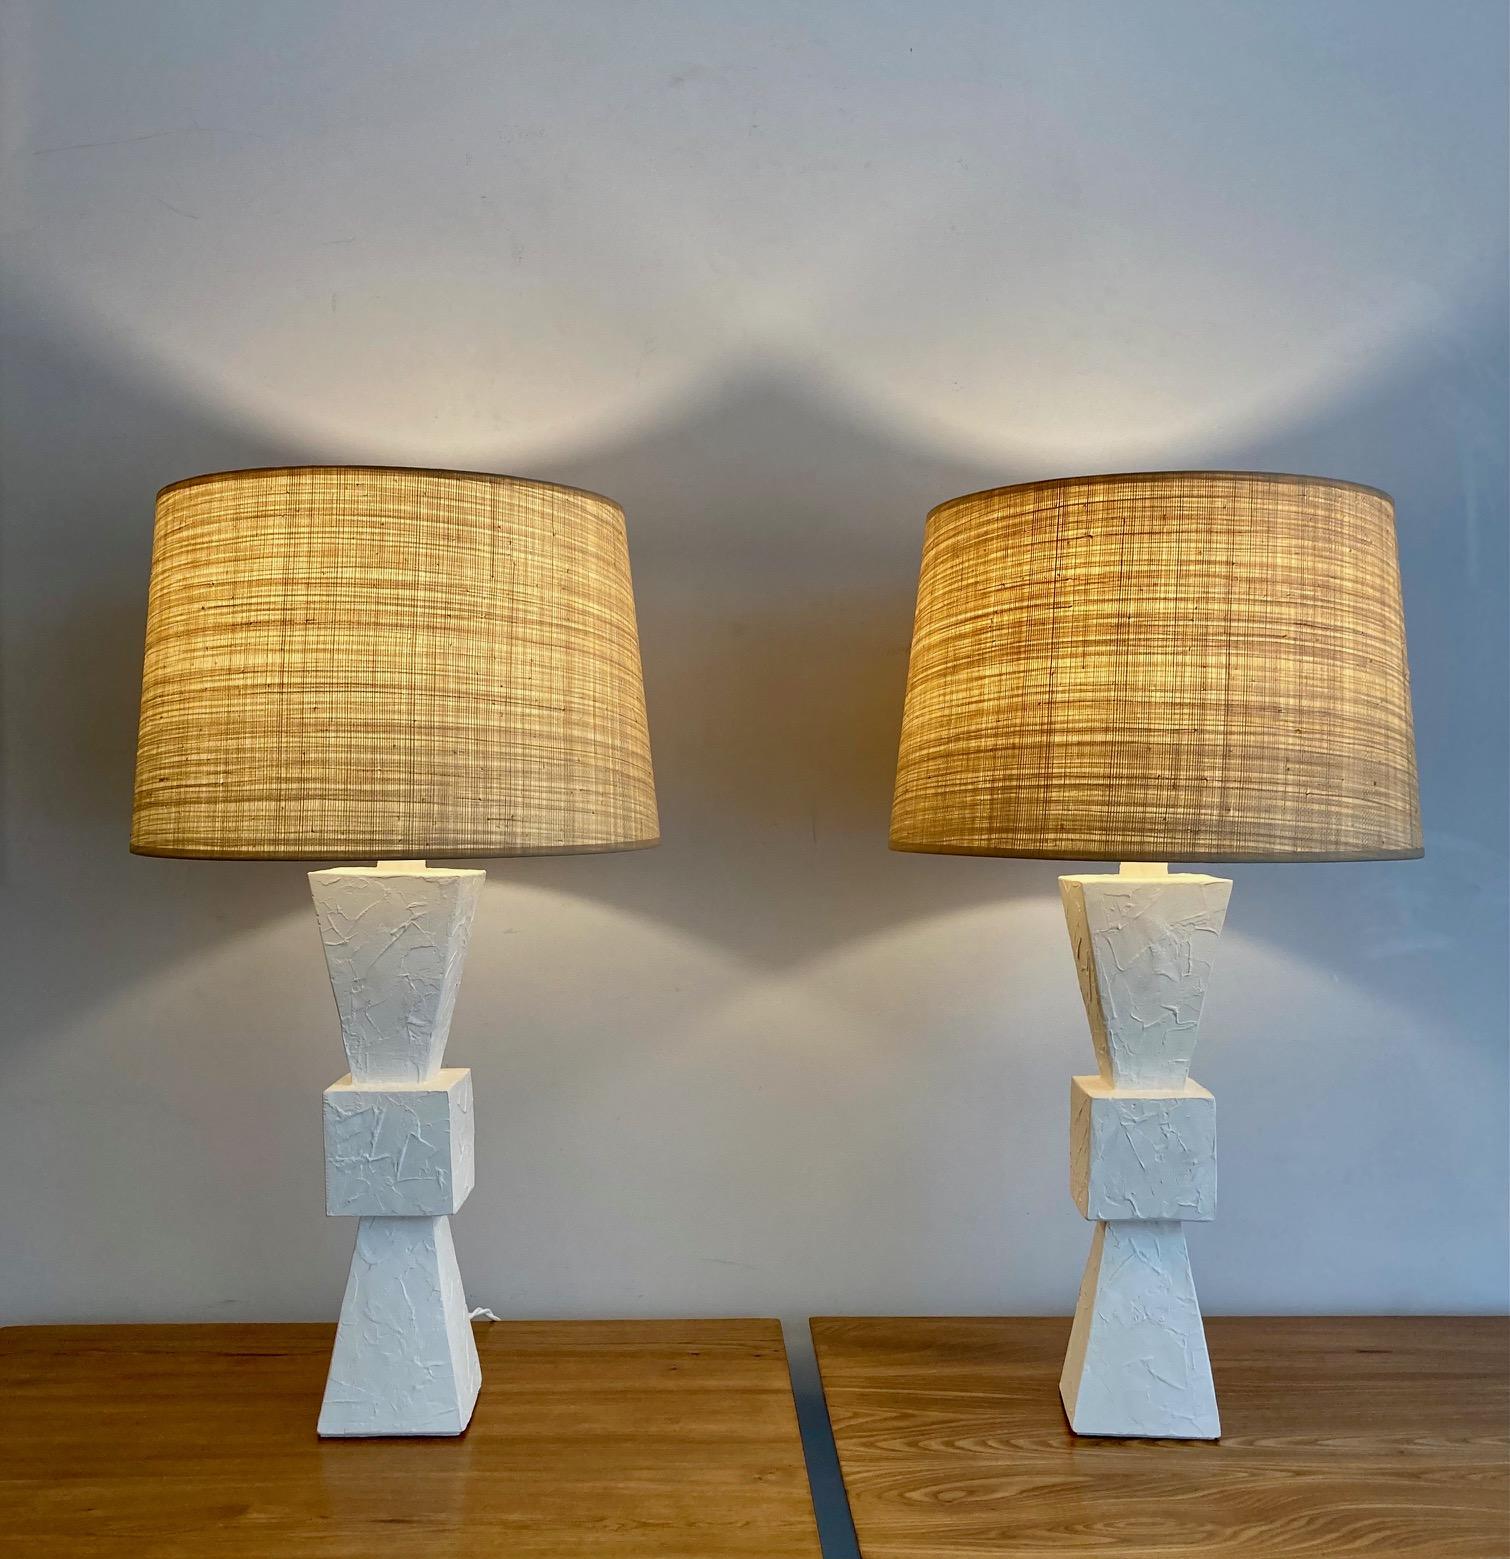 Pair of plaster lamps, baluster shape.
With custom made shades in vegetal fiber.
France, contemporary creation

Measures: Total height 81 cm - 31.9 inches
Plaster base height (including collar) 52 cm - 20.5 inches
Diameter (shade) 47 cm - 18.5